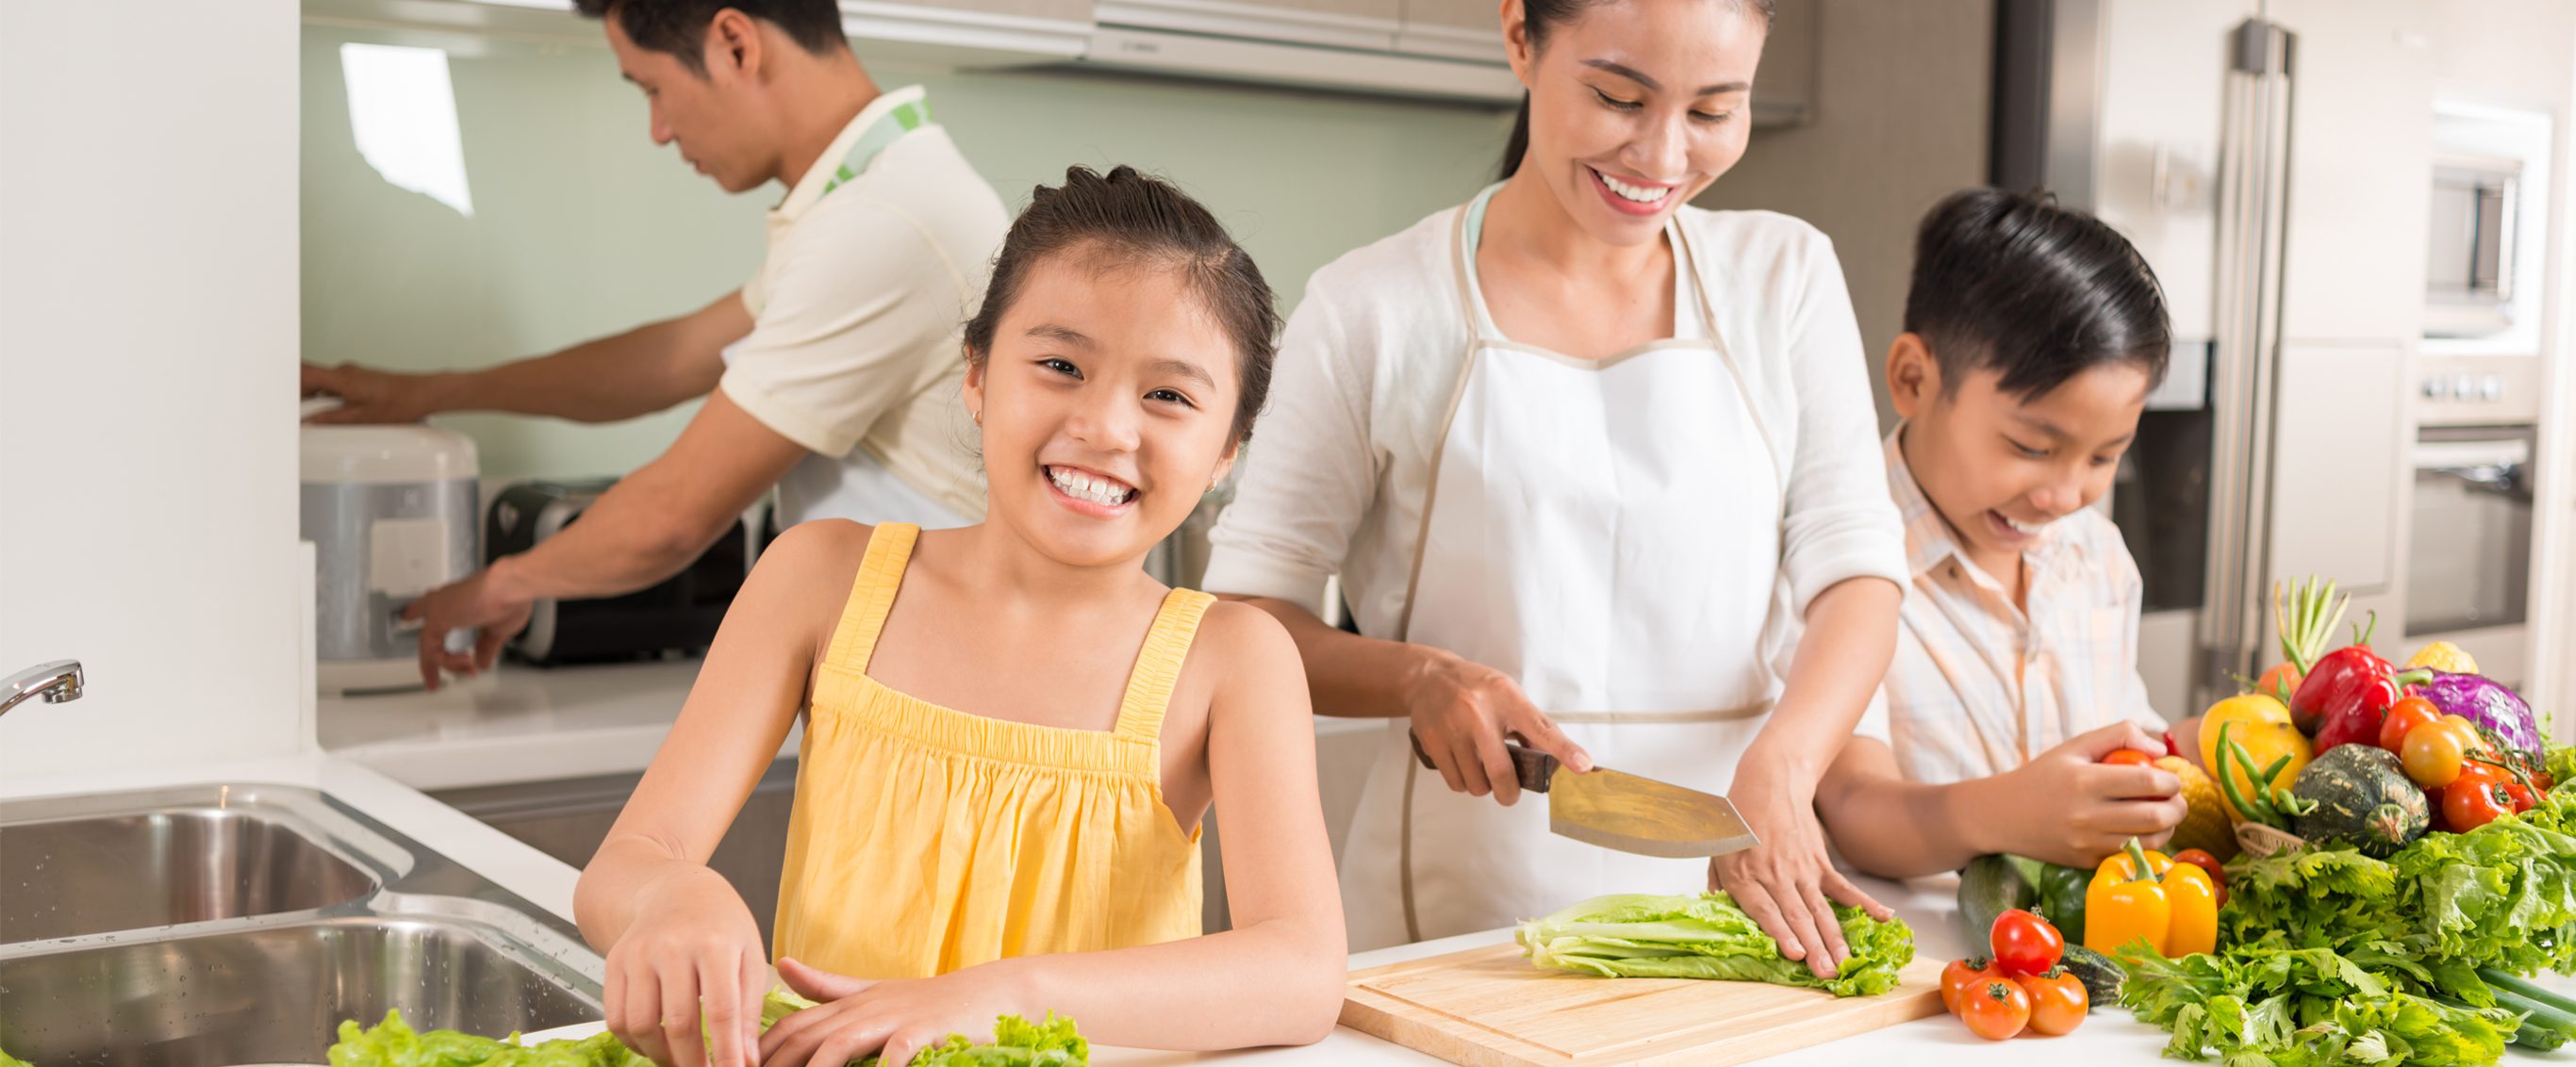 Plant-Based Diet for Kids Upping the Cool Factor